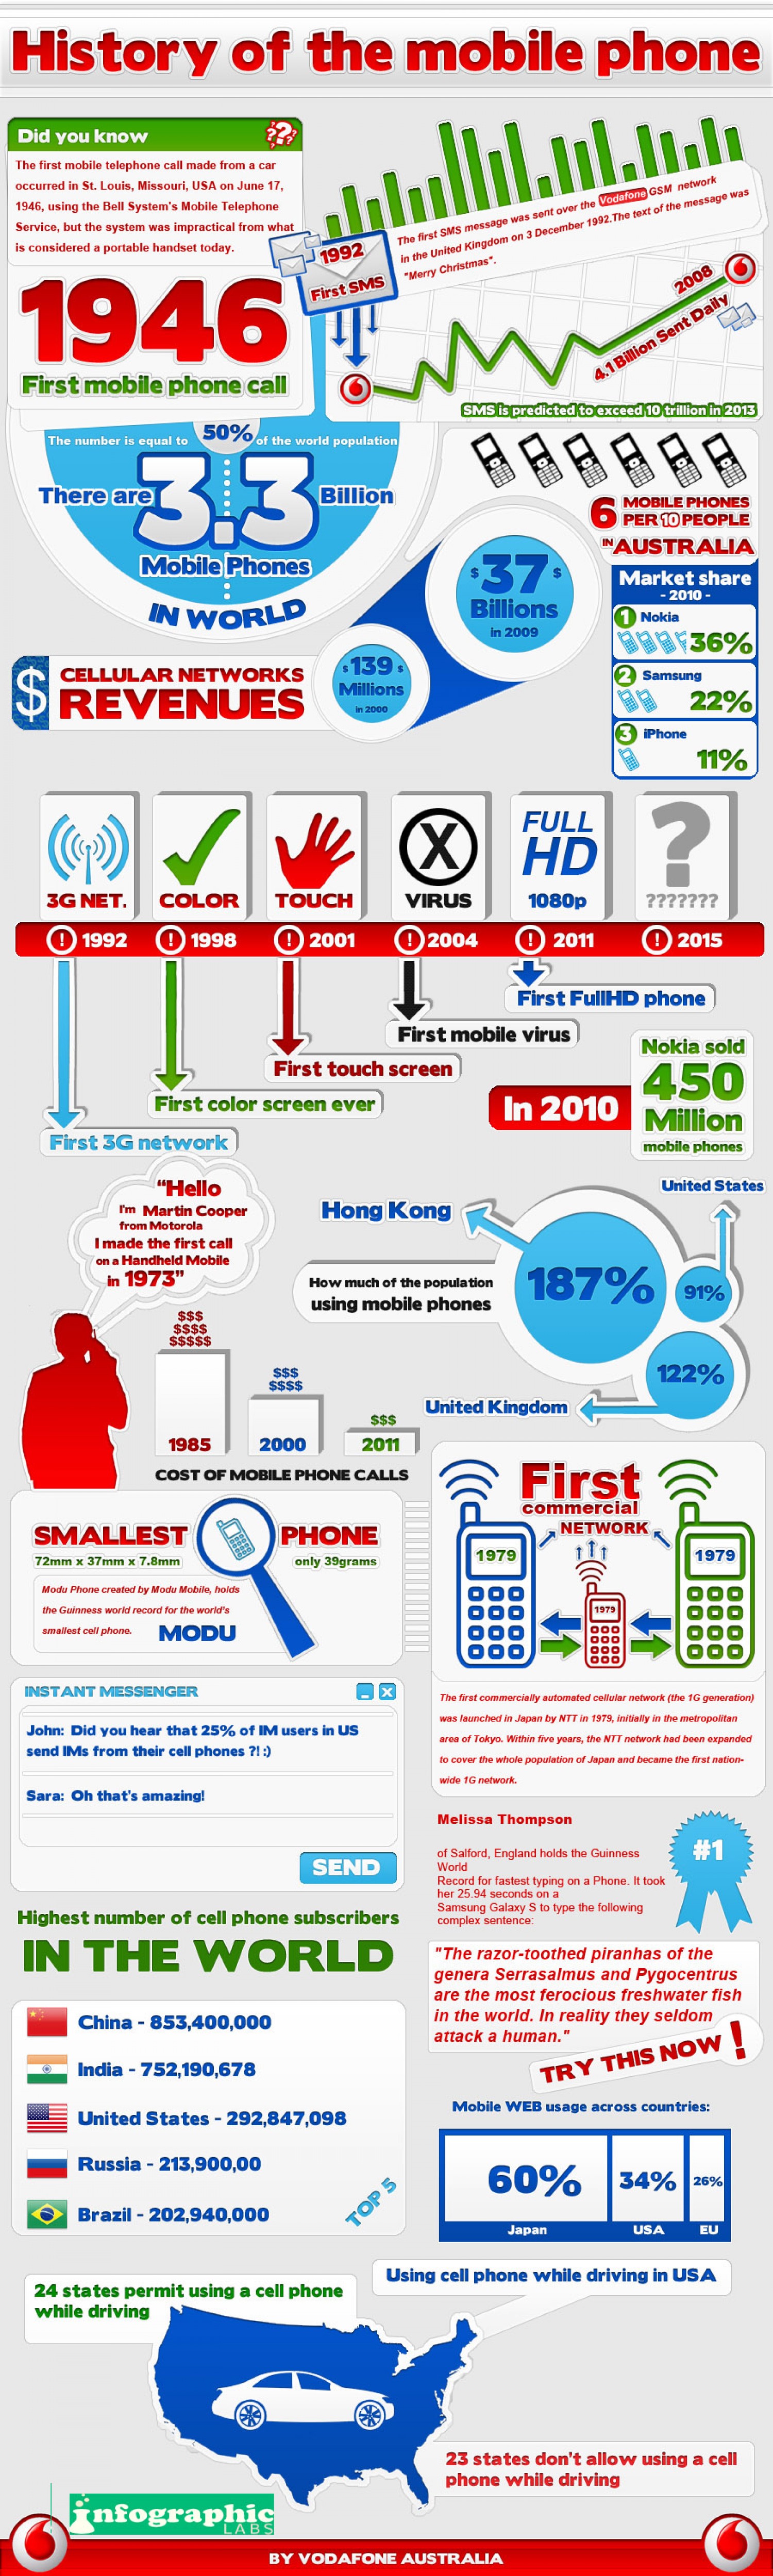 History of mobile phone